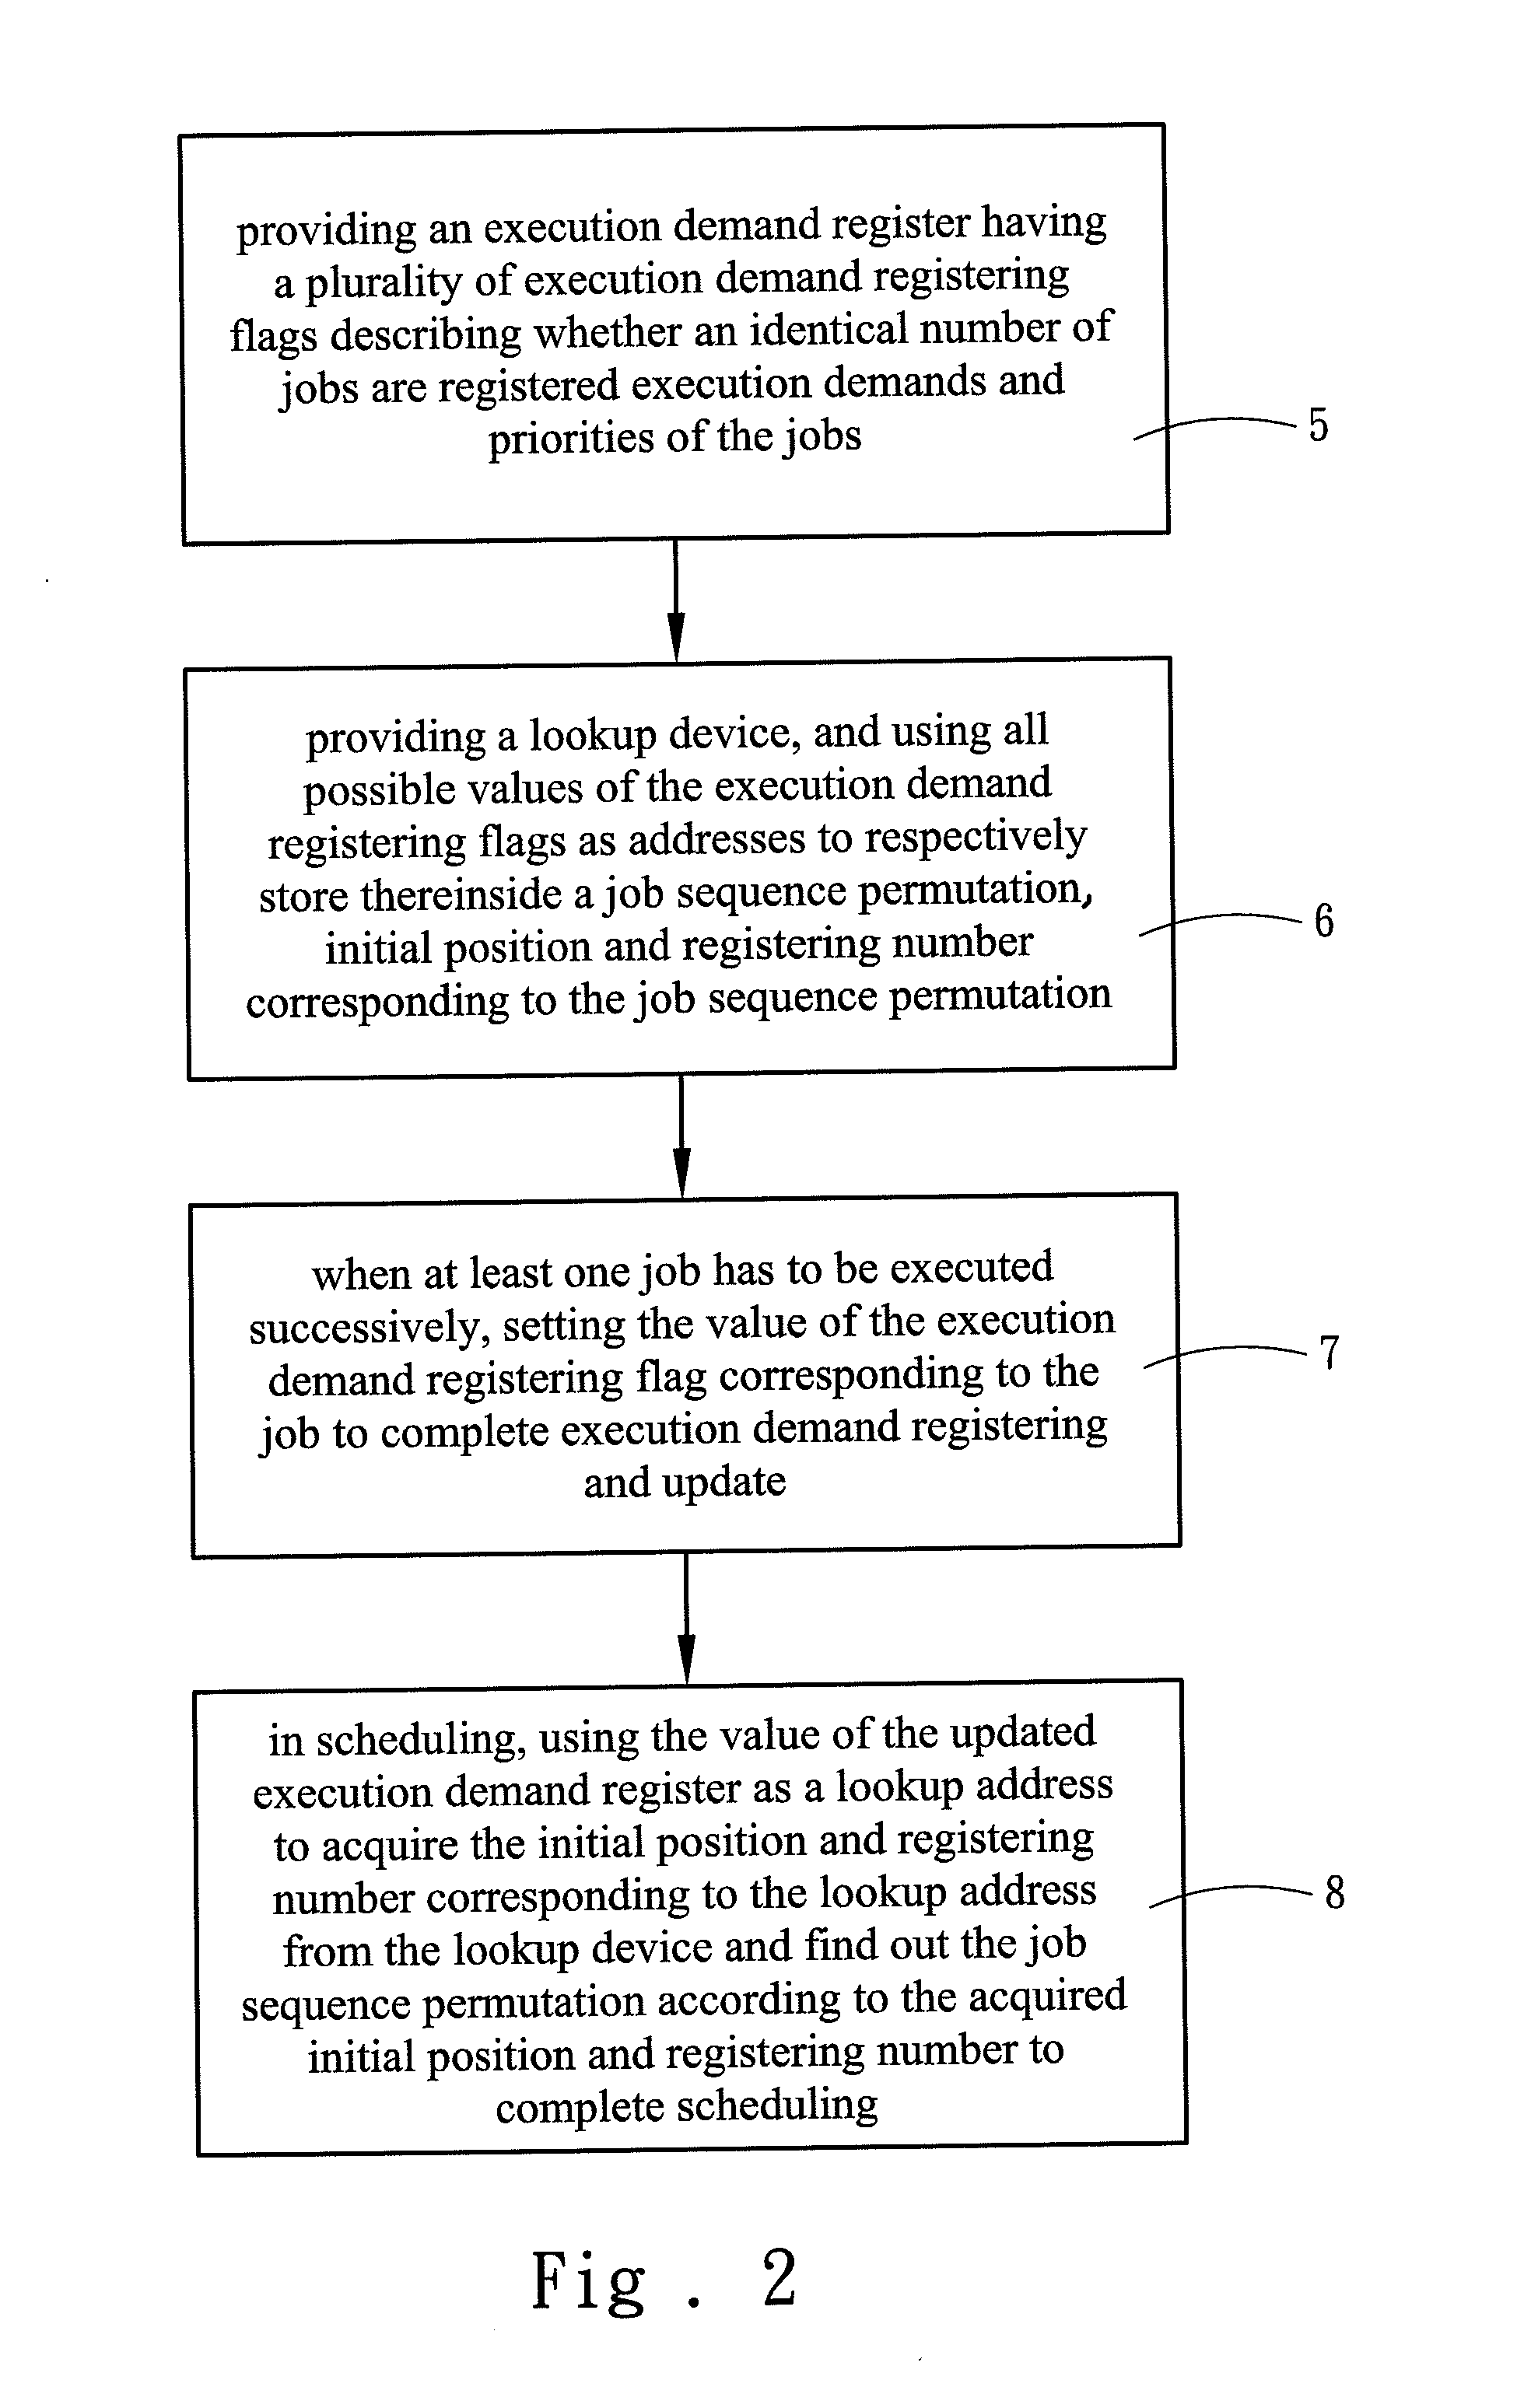 Method for registering and scheduling execution demands